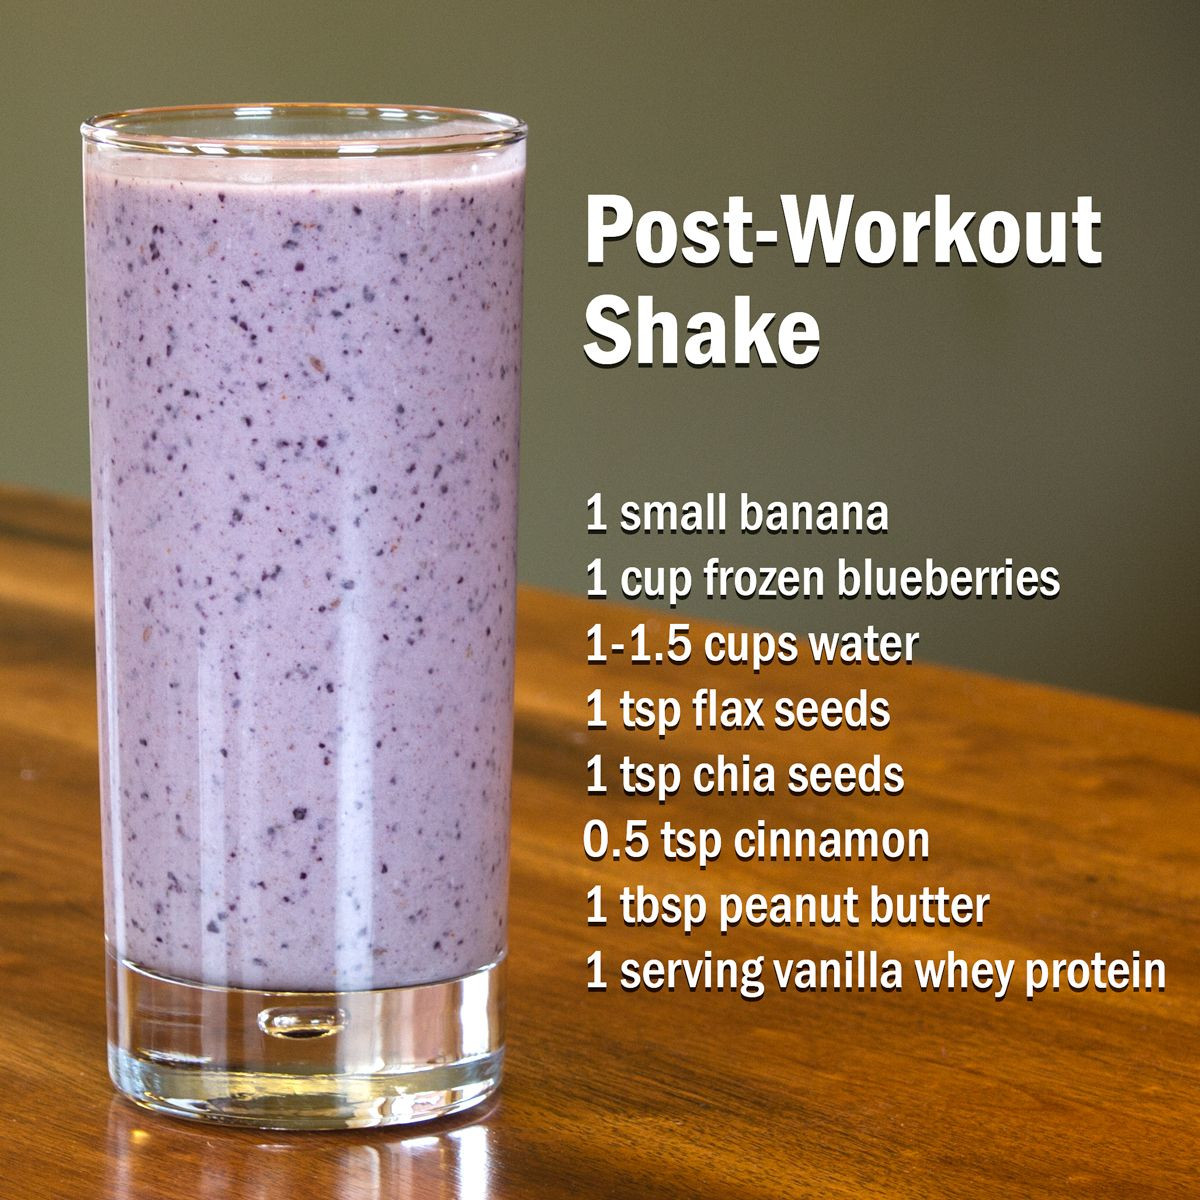 Whey Protein Shake Recipes For Weight Loss
 post workout protein shake recipe